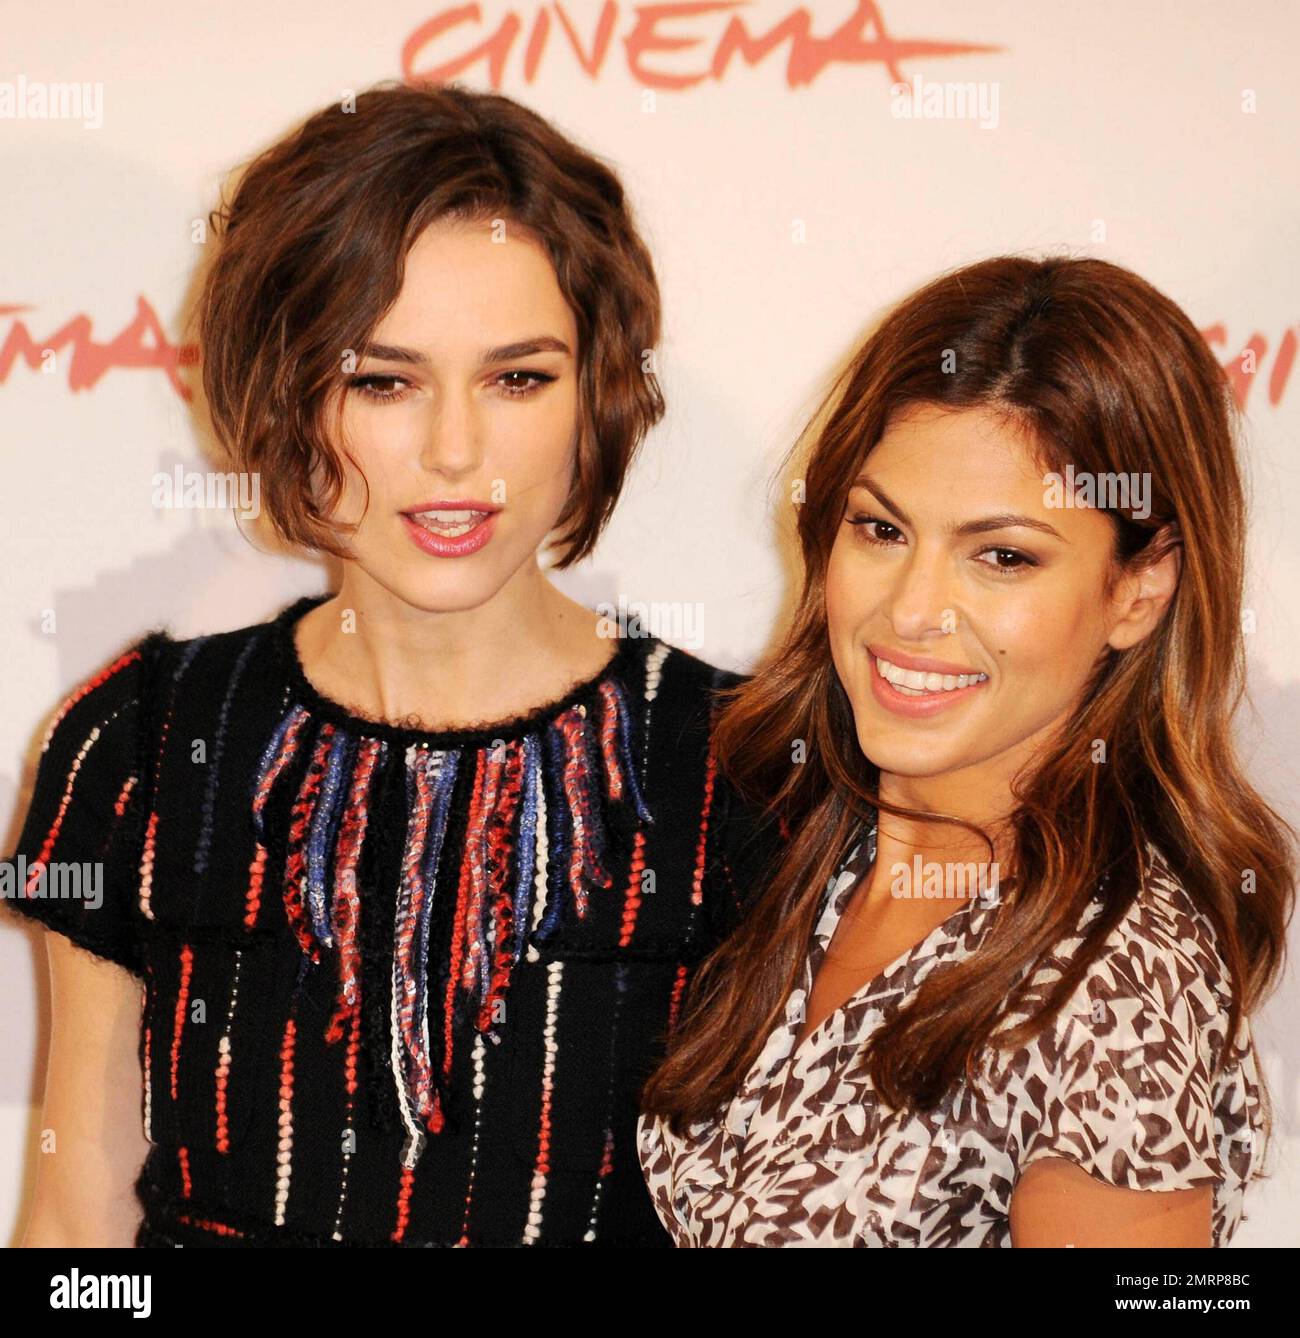 Co-stars Keira Knightley and Eva Mendes look very friendly with each other at the photo call for 'Last Night'.  The romantic drama, which stars Keira Knightley, Sam Worthington and Eva Mendes, will open the 5th International Rome Film Festival. Rome, ITA. 10/28/10. Stock Photo